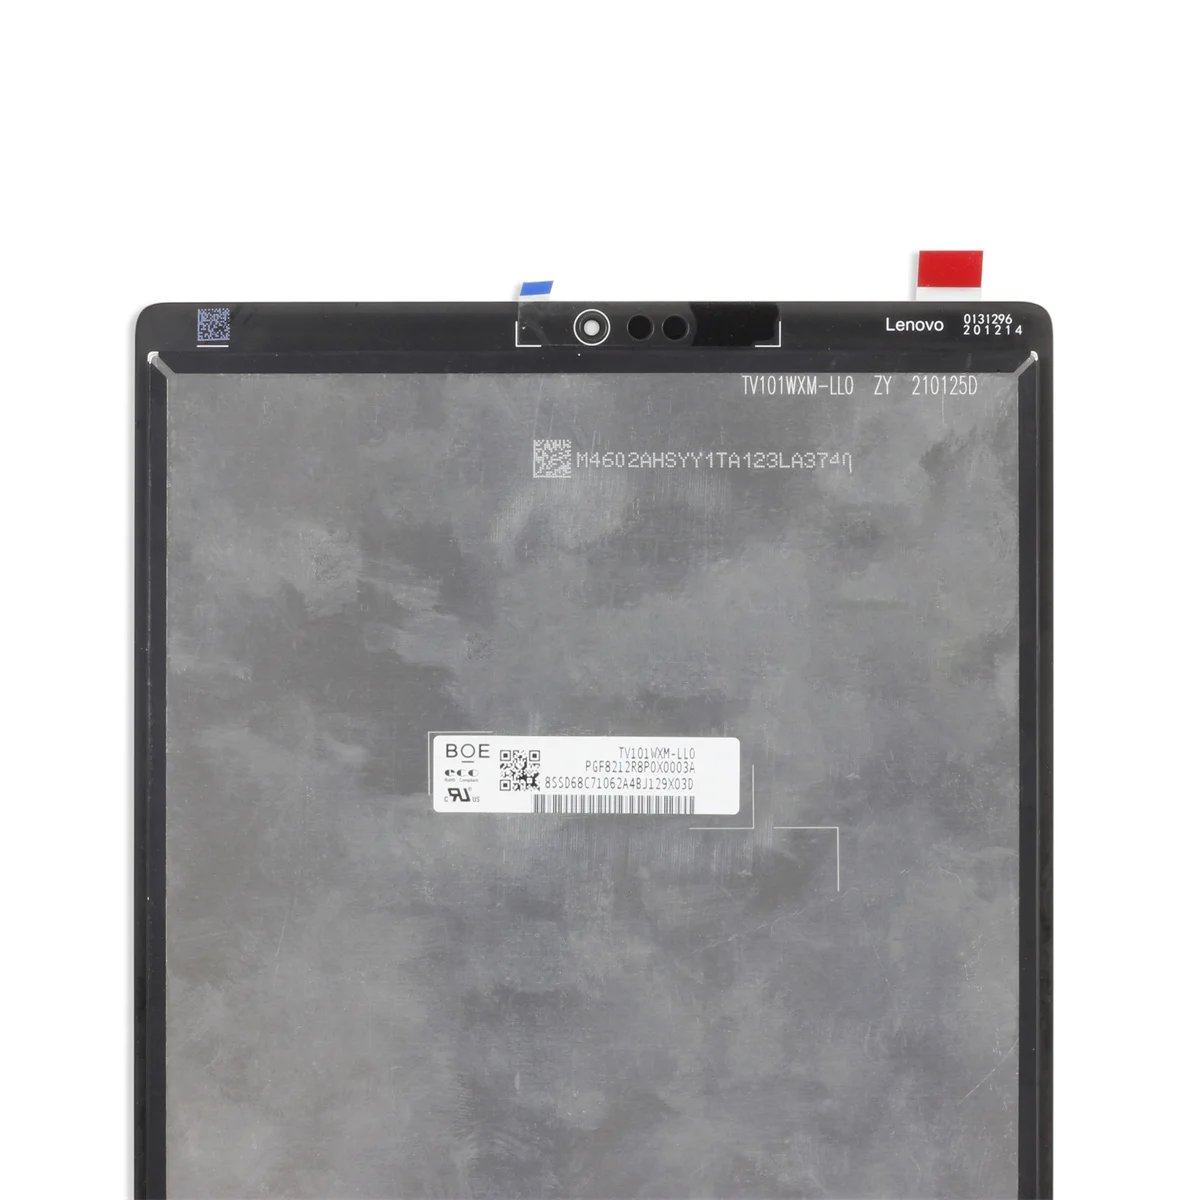 Lenovo Tab M10 HD (2nd Gen) Display and Touch Screen Replacement  TB-X306F/X306X - Touch LCD Baba